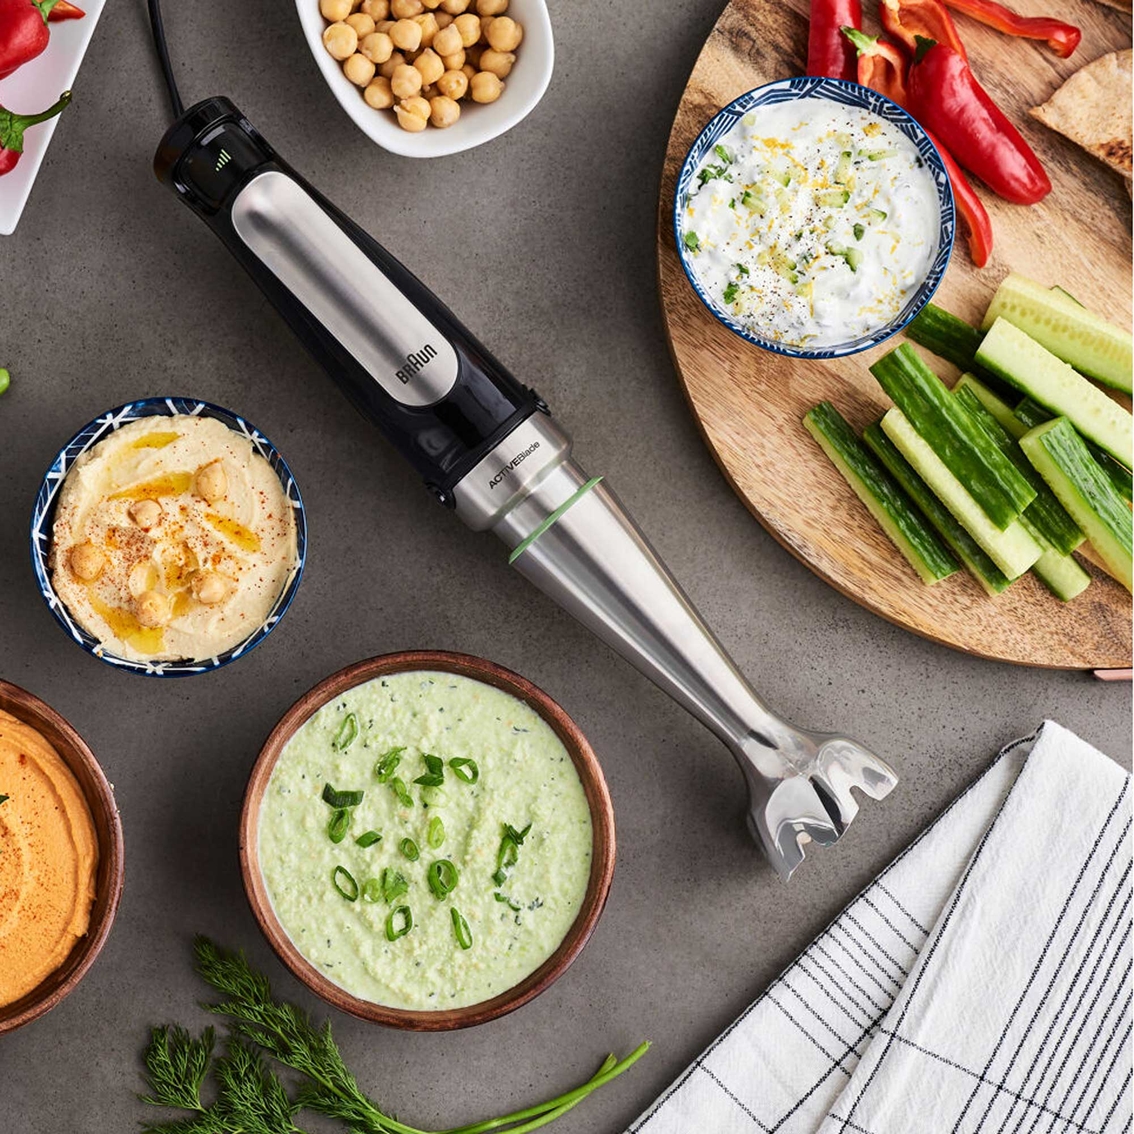 Braun MultiQuick 7 Smart-Speed Hand Blender with 6 Cup Food Processor - Image 6 of 9